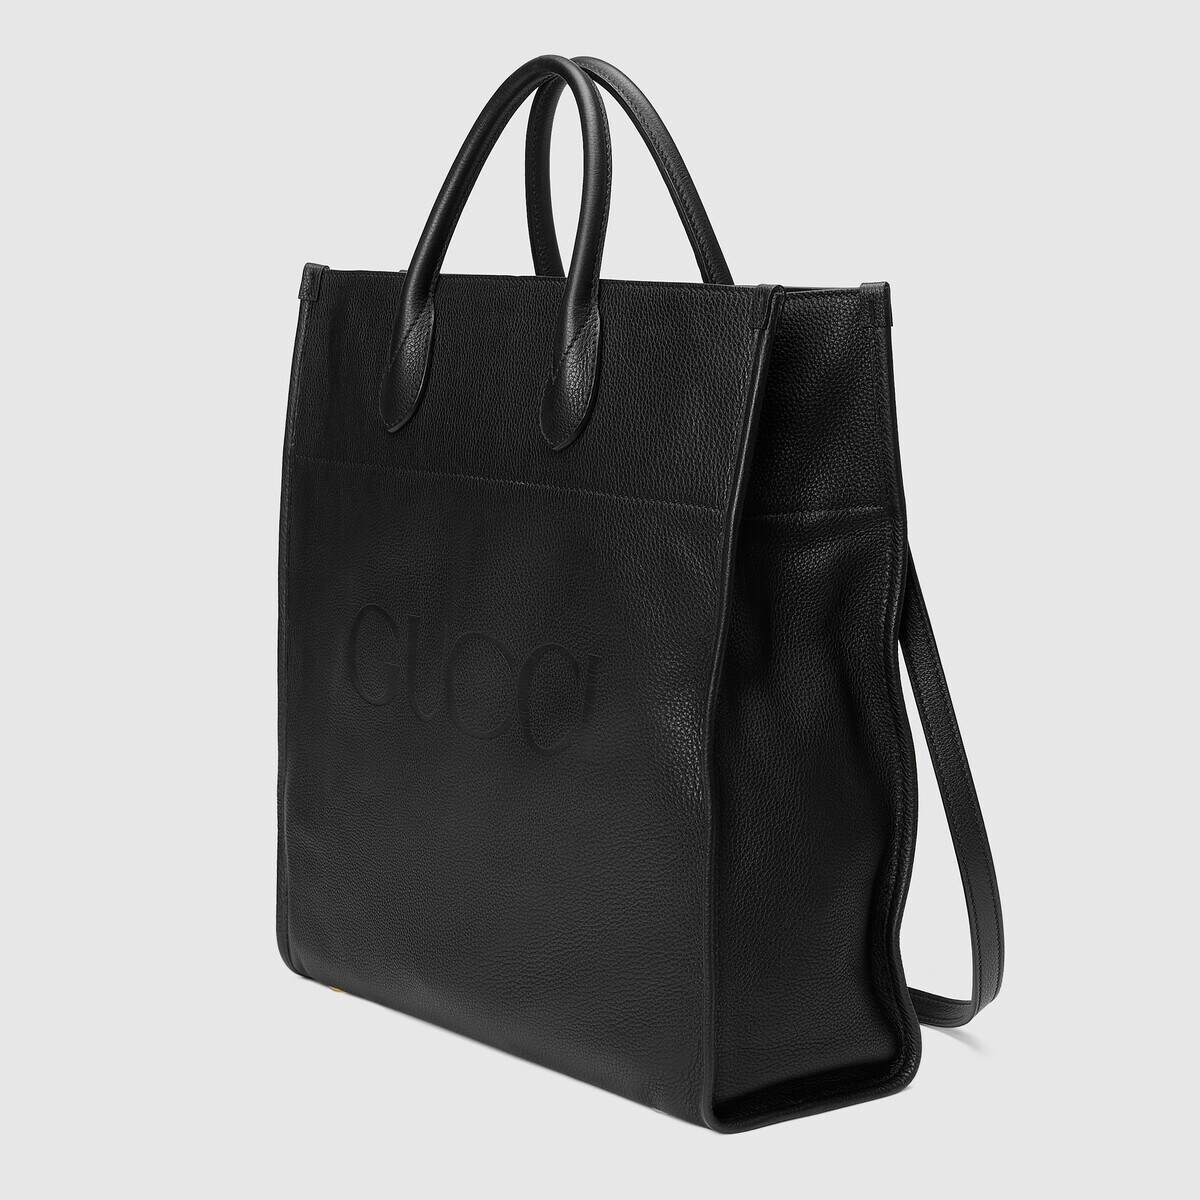 Large tote with Gucci logo - 2